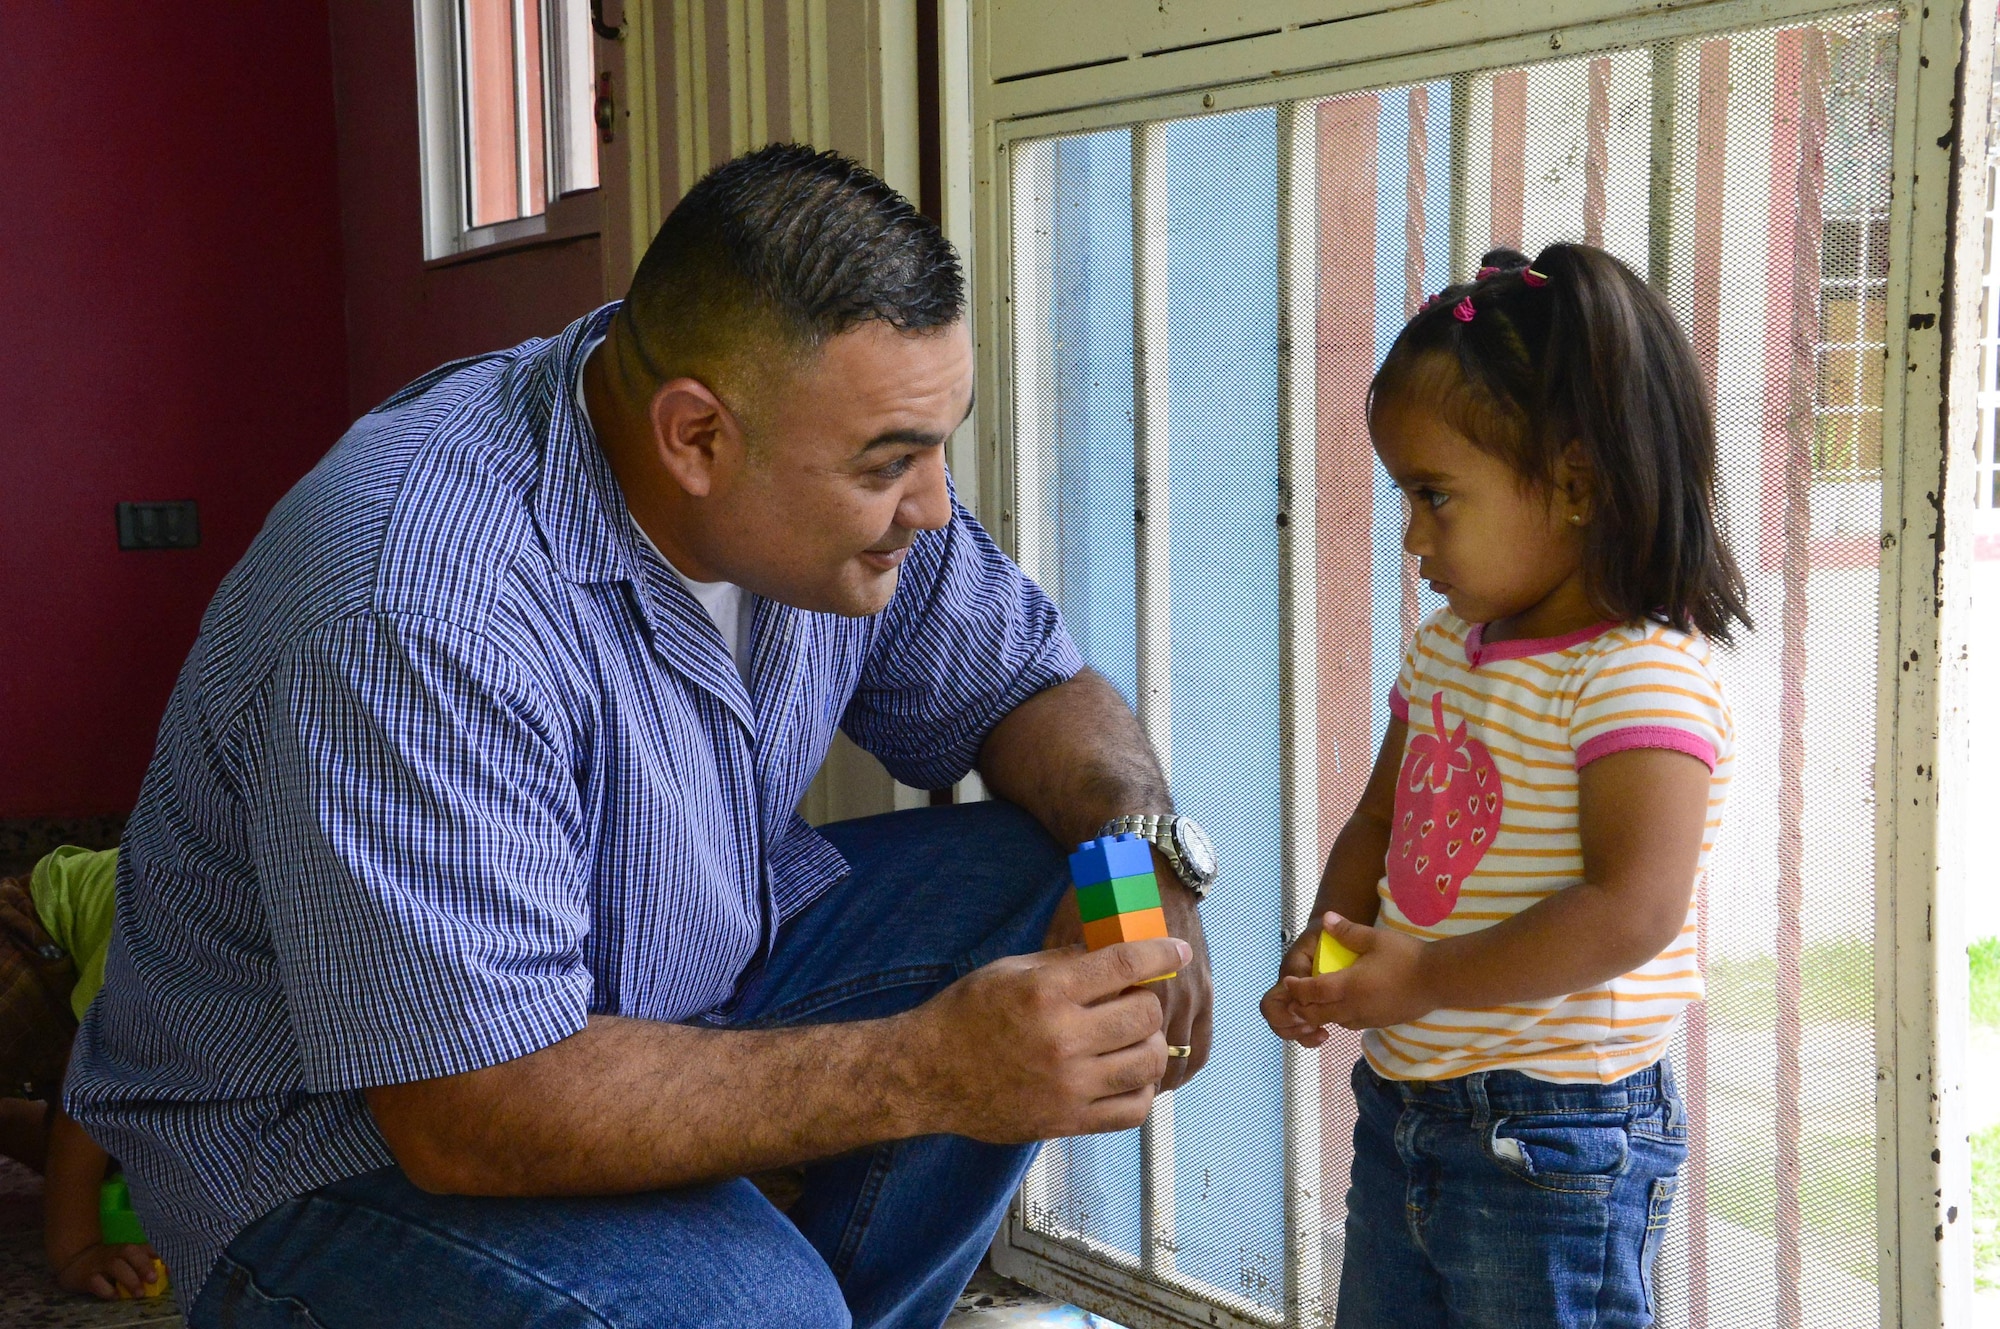 Master Sgt. Roberto Vasquez, the superintendent of 12th Air Force (Air Forces Southern)  Plans, Requirements, and Programs section, plays with a young girl at Casa de Corderitos orphanage outside the city of Tegucigalpa, Honduras, June 18, 2015. Members from 12th Air Force (AFSOUTH) spent some of their downtime during a three-day assessment visit to Honduras air bases to volunteer with the local community and to deliver toys and candy that were donated by businesses in Tucson, Ariz. (U.S. Air Force photo/Tech. Sgt. Heather R. Redman)  